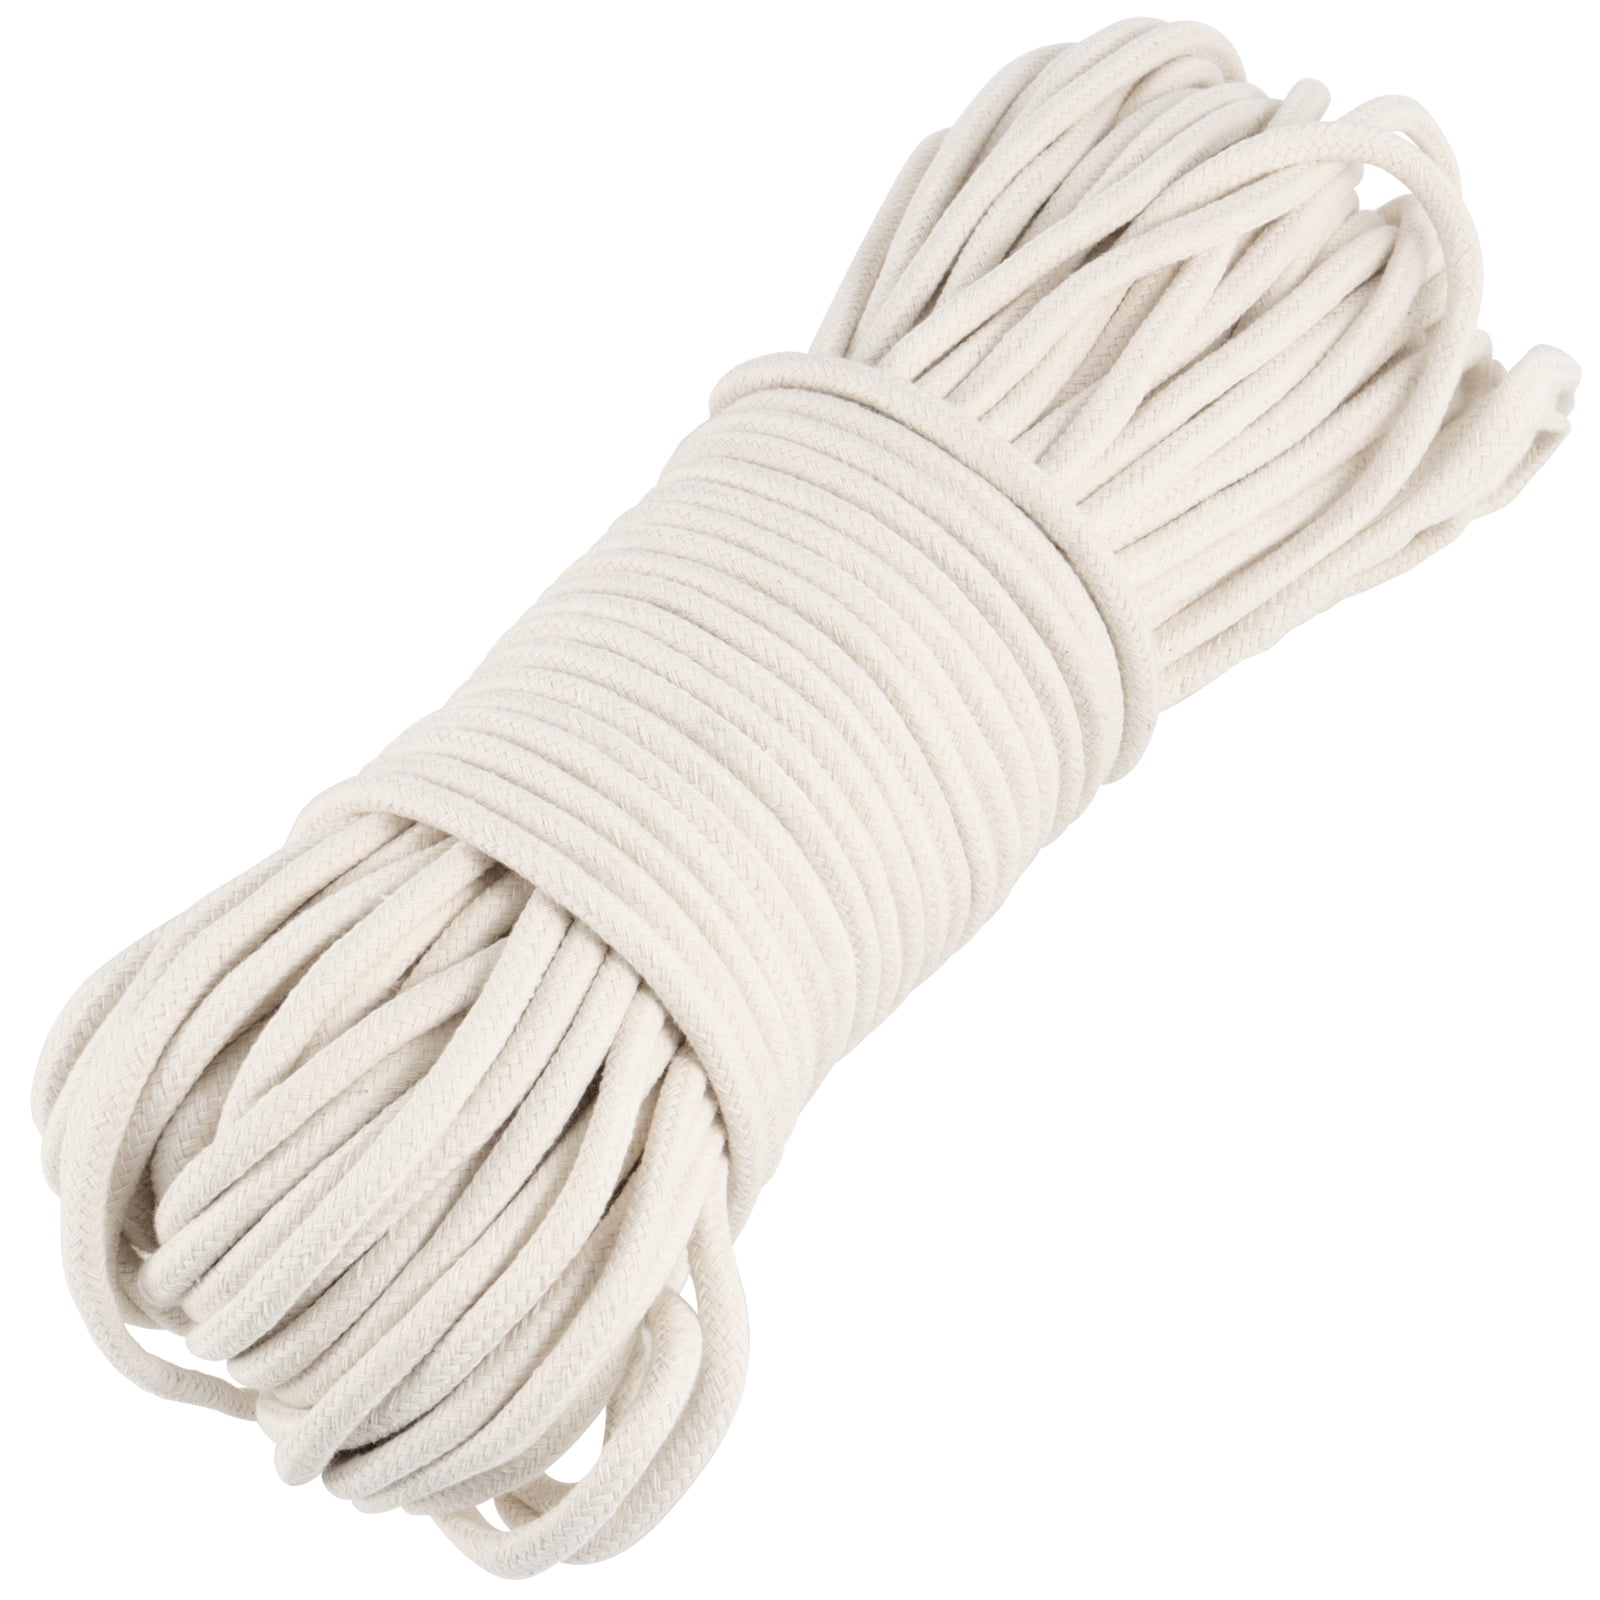 KINJOEK 328 FT 1/4 Inch Natural Cotton Rope White Craft